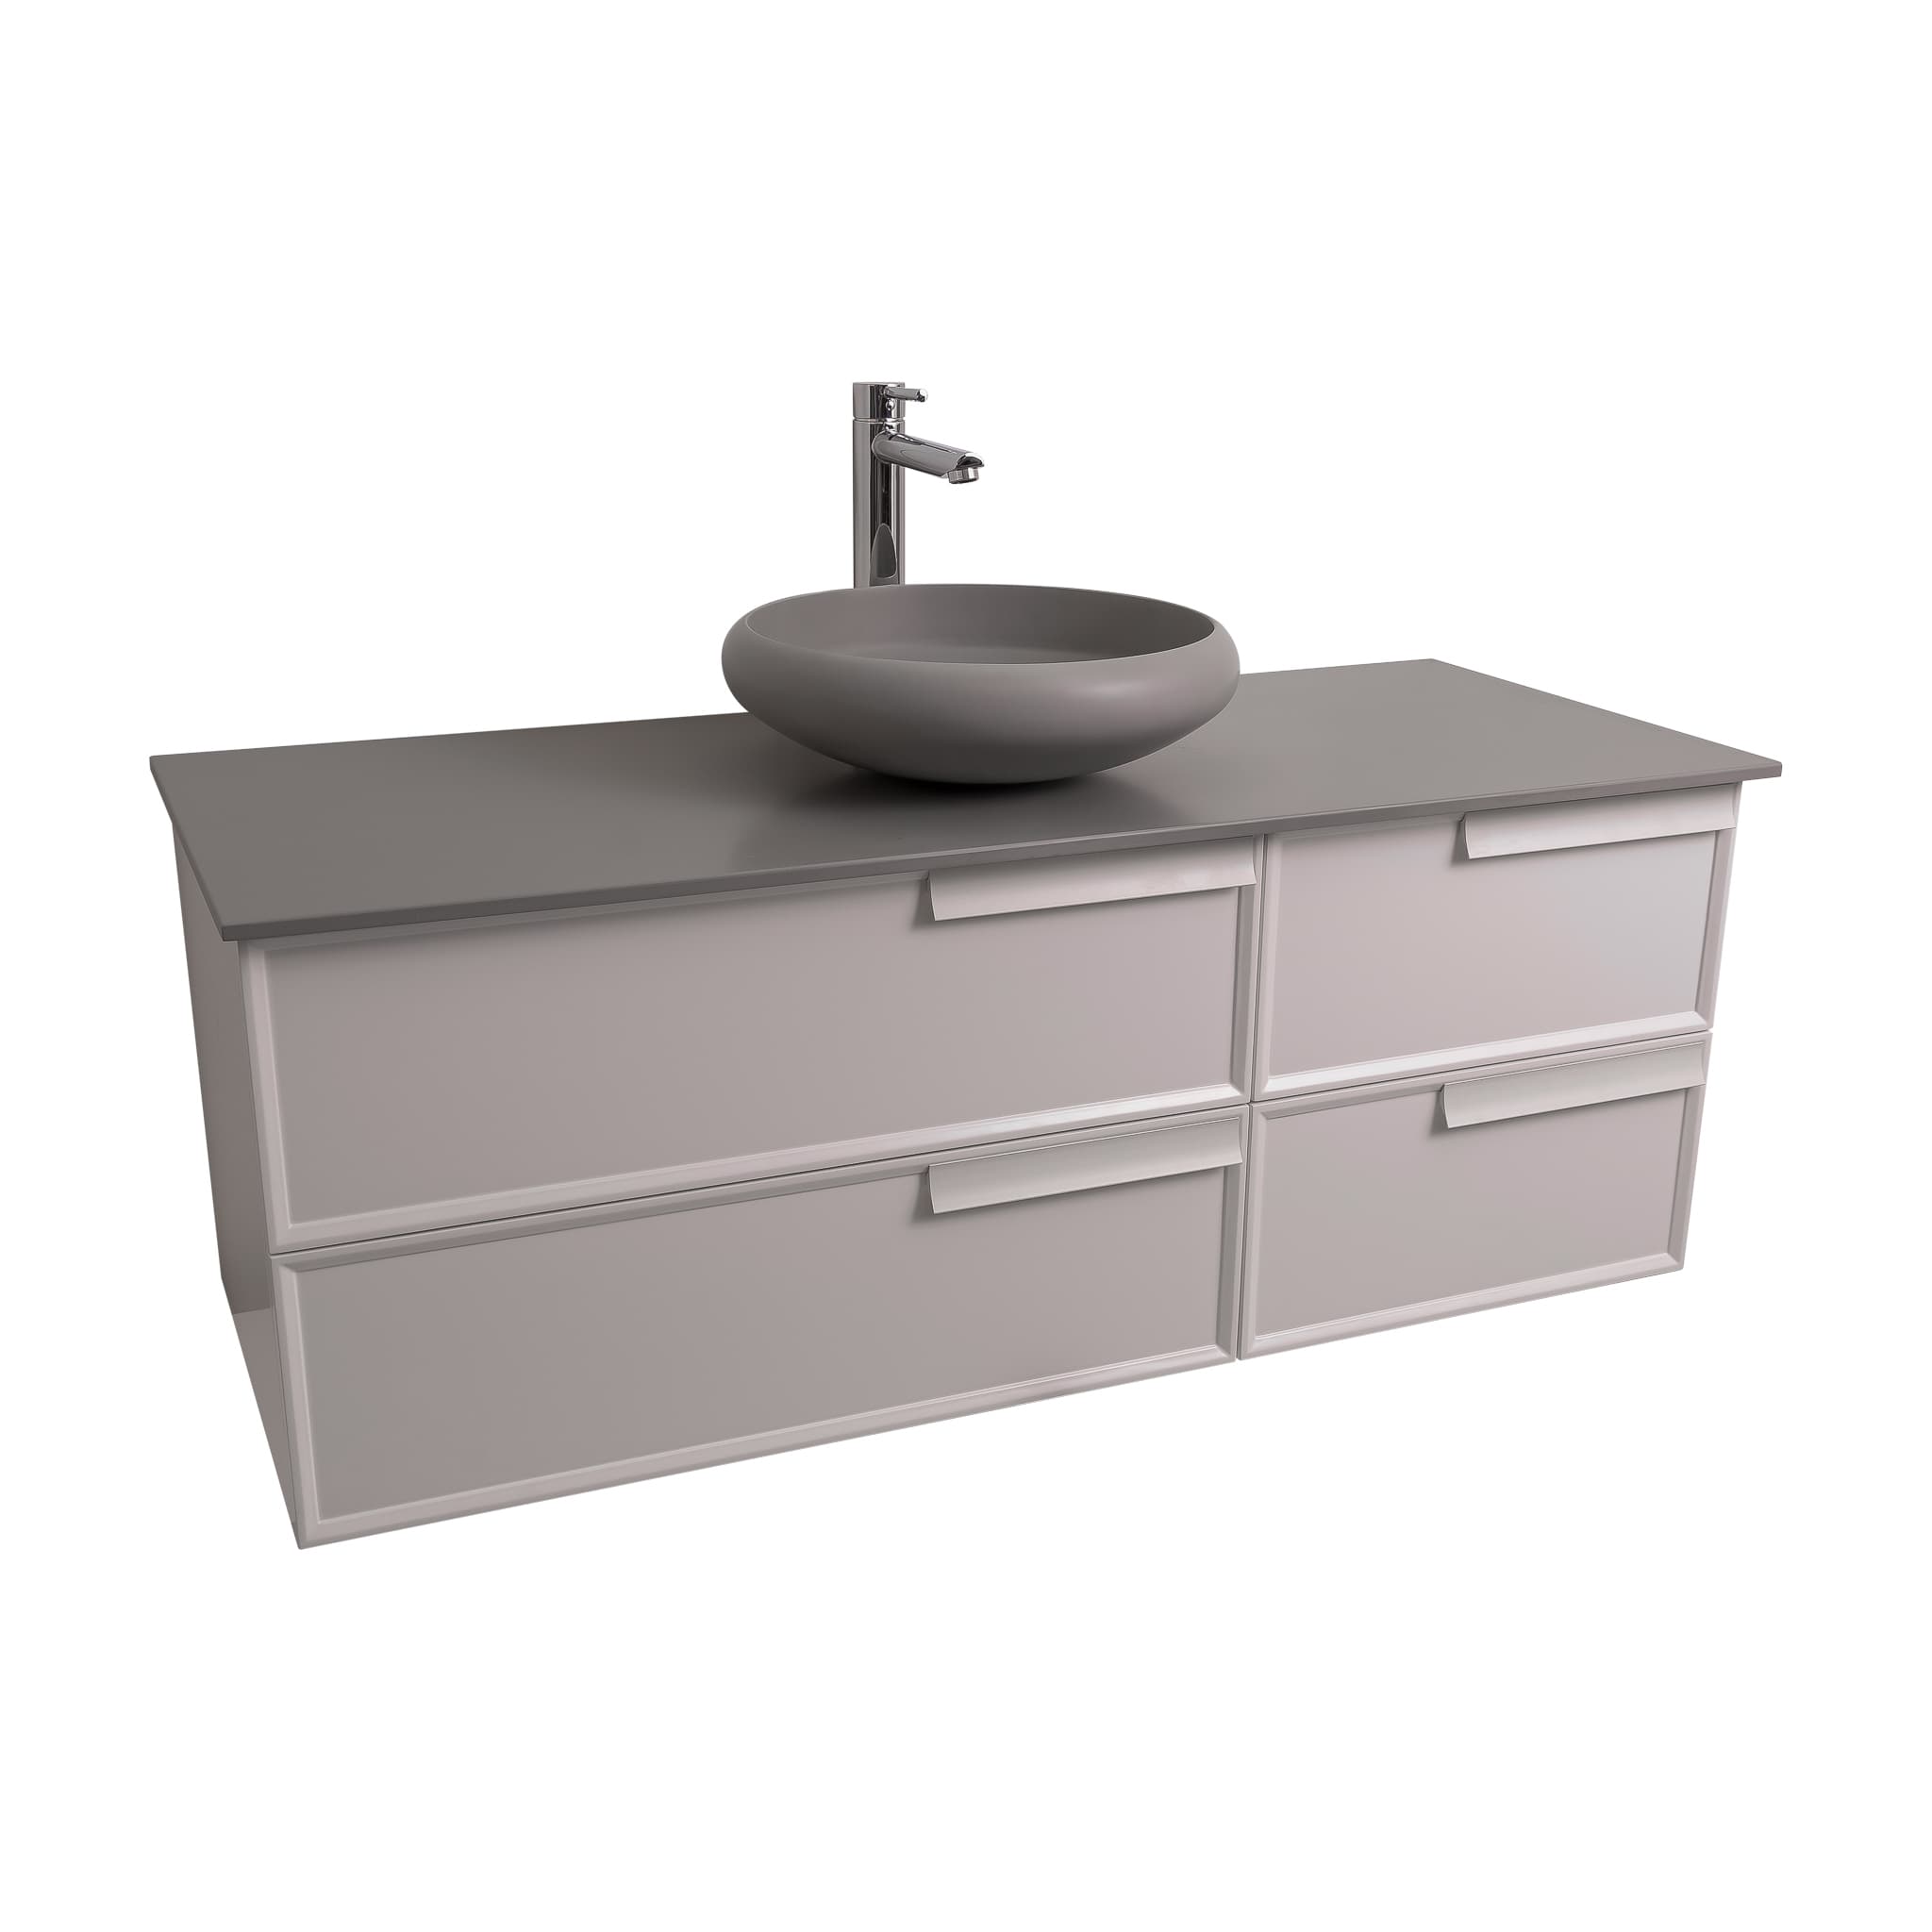 Garda 47.5 Matte White Cabinet, Solid Surface Flat Grey Counter and Round Solid Surface Grey Basin 1153, Wall Mounted Modern Vanity Set